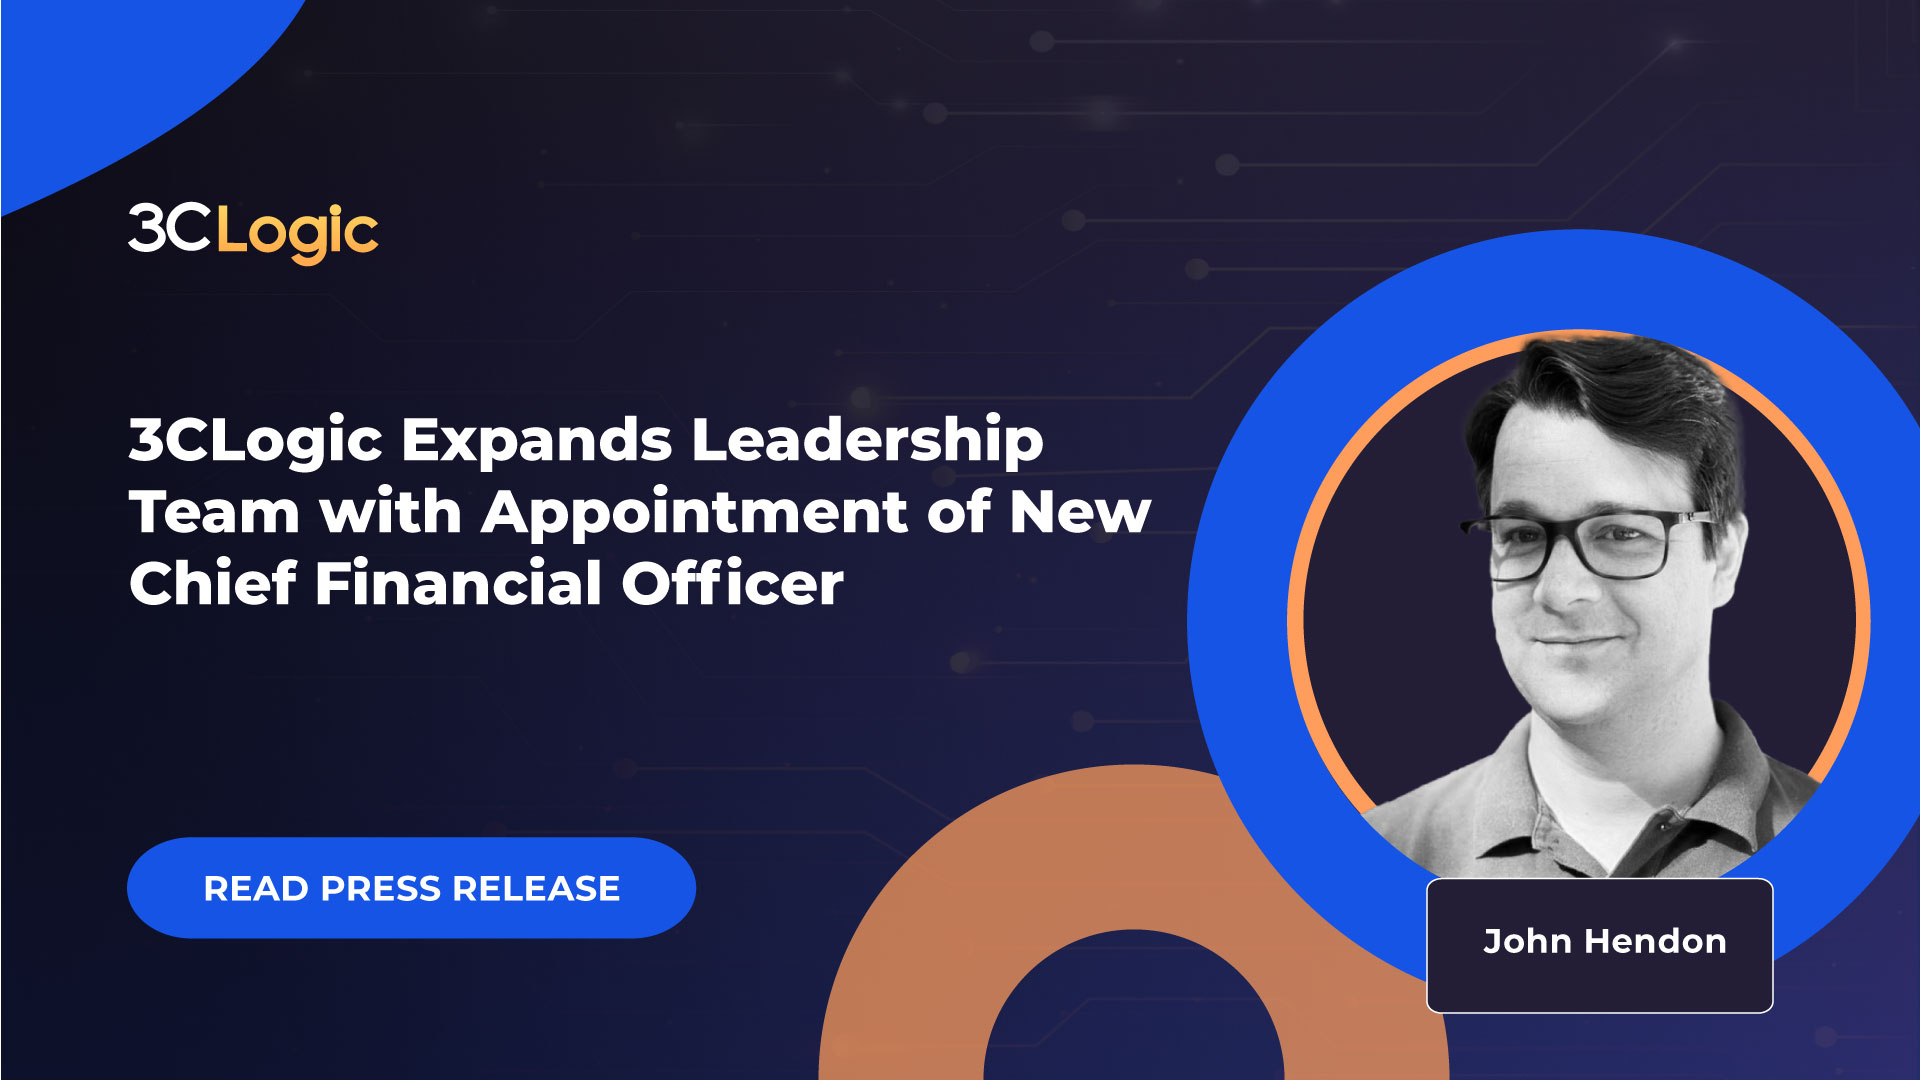 3CLogic Expands Leadership Team with Appointment of New Chief Financial Officer